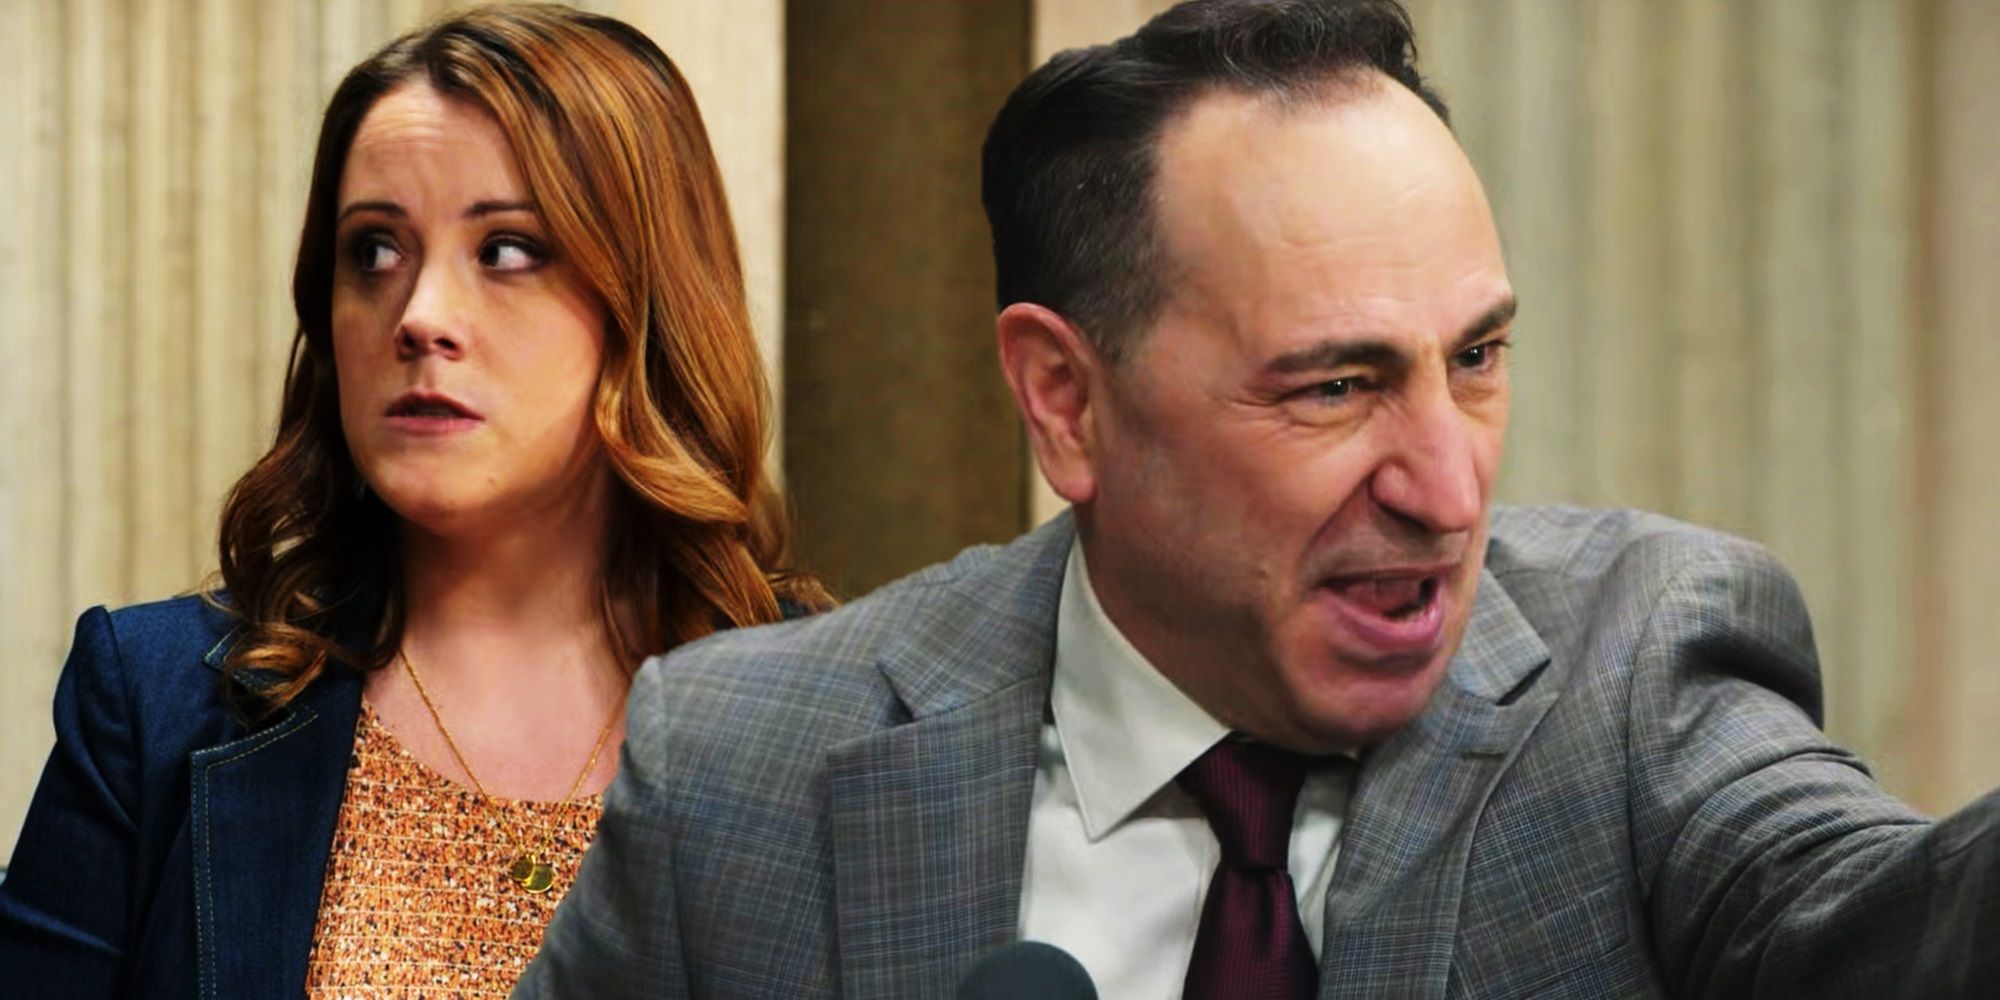 Collage of Mocha Joe and Tara Michaelson in court in the Curb Your Enthusiasm finale